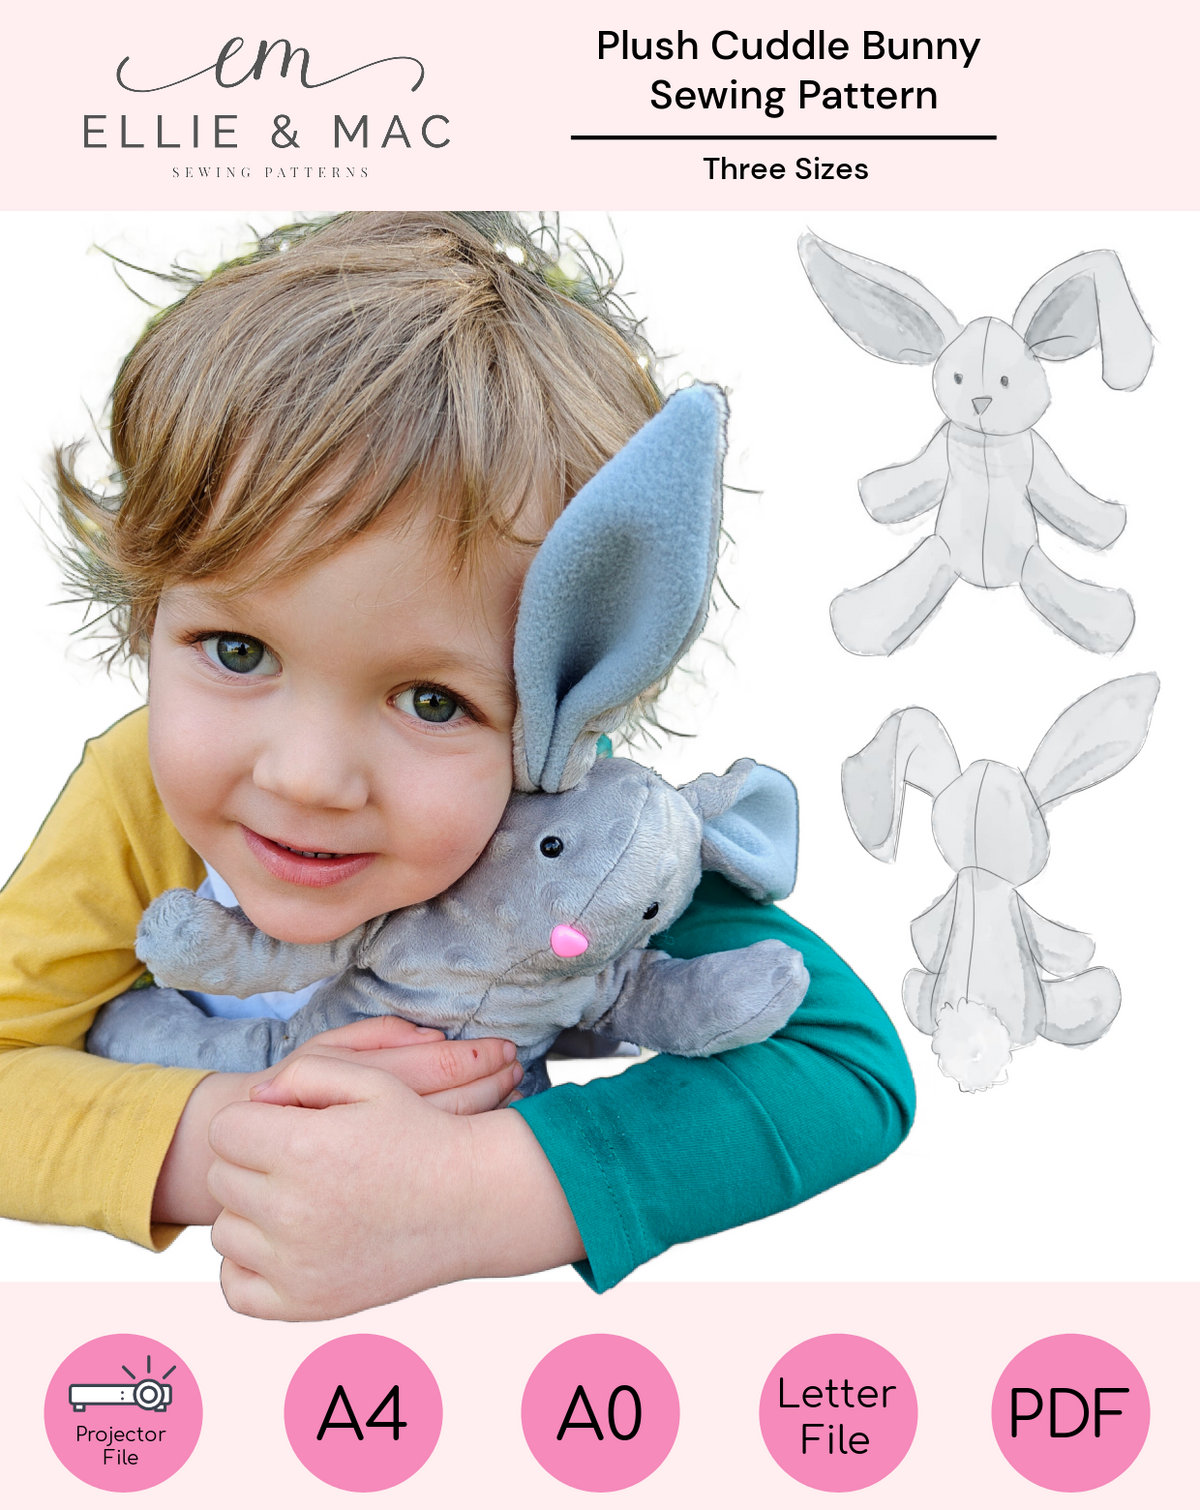 Plush Cuddle Bunny PDF sewing craft pattern by Ellie and Mac Patterns